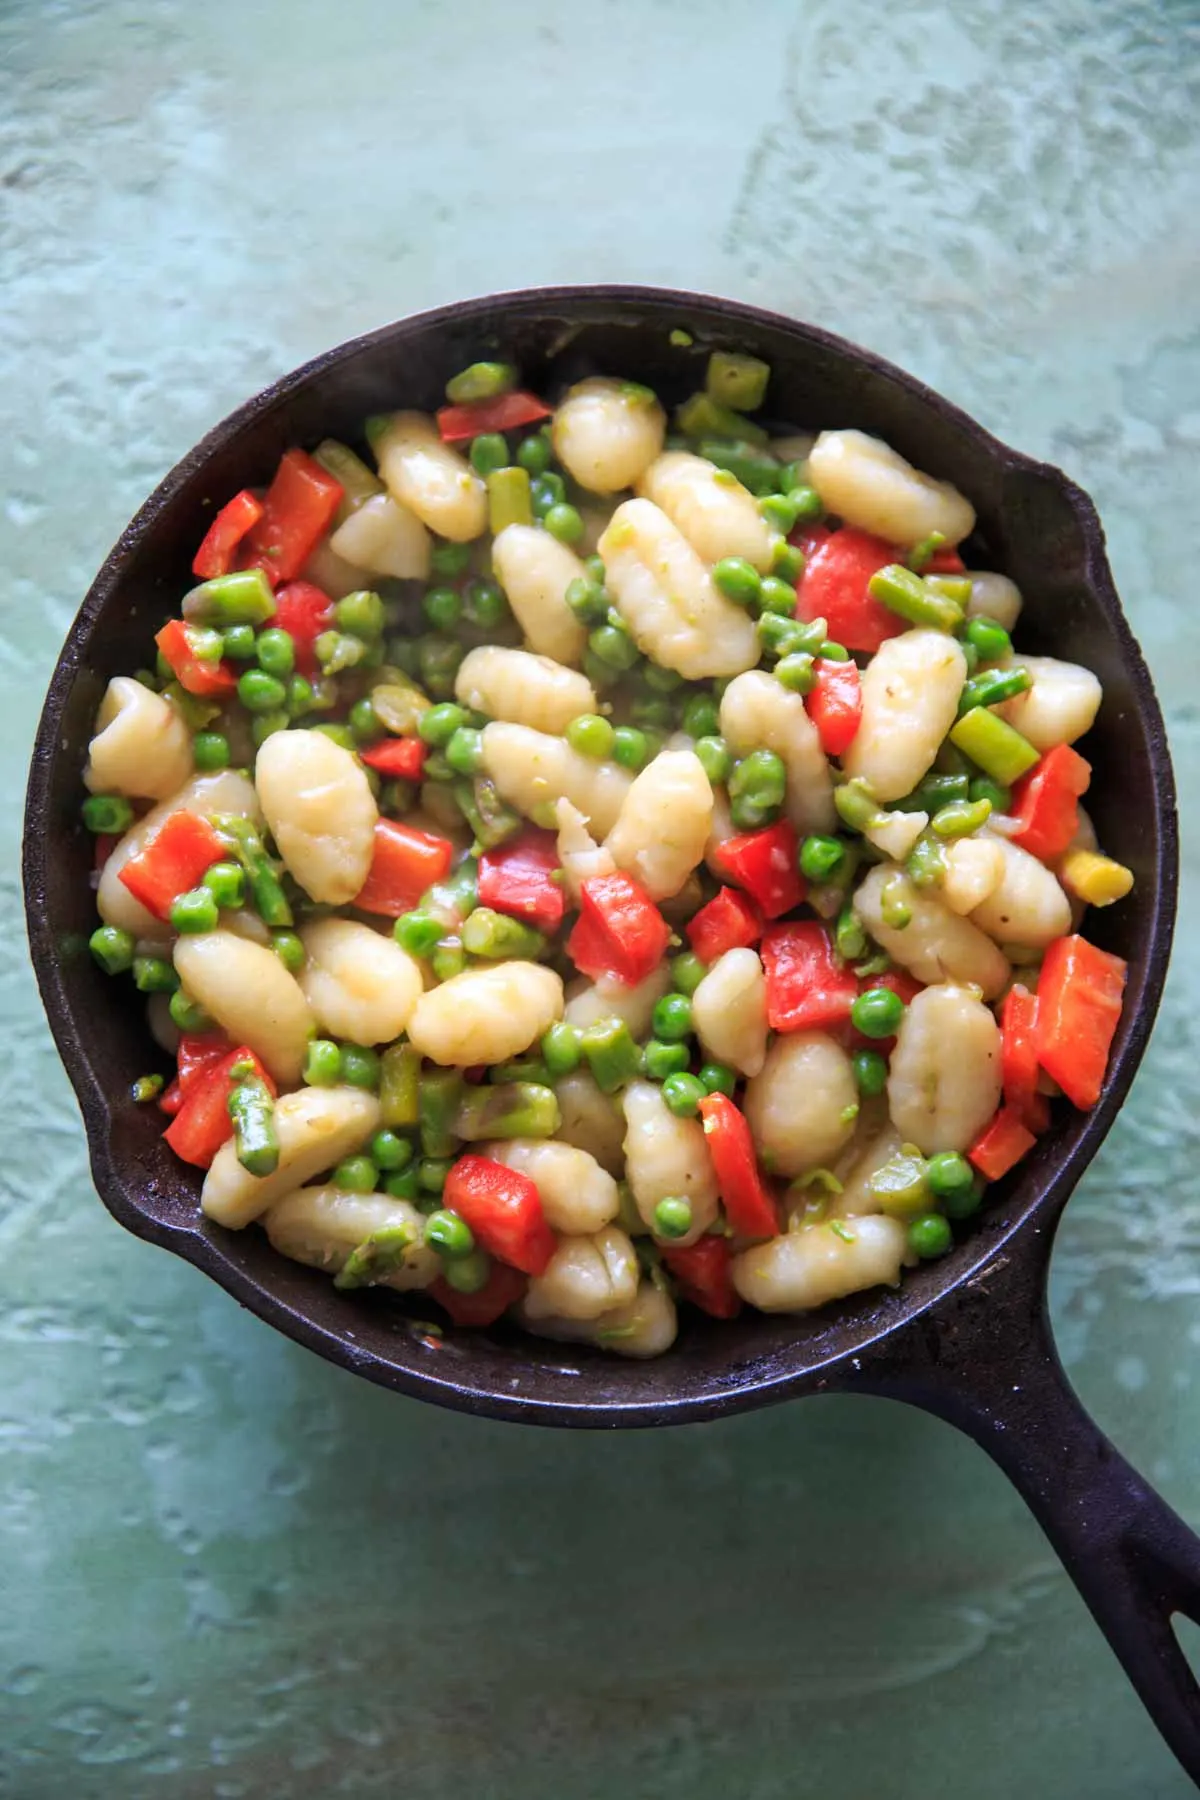 gnocchi and veggies in cast iron pan cooking